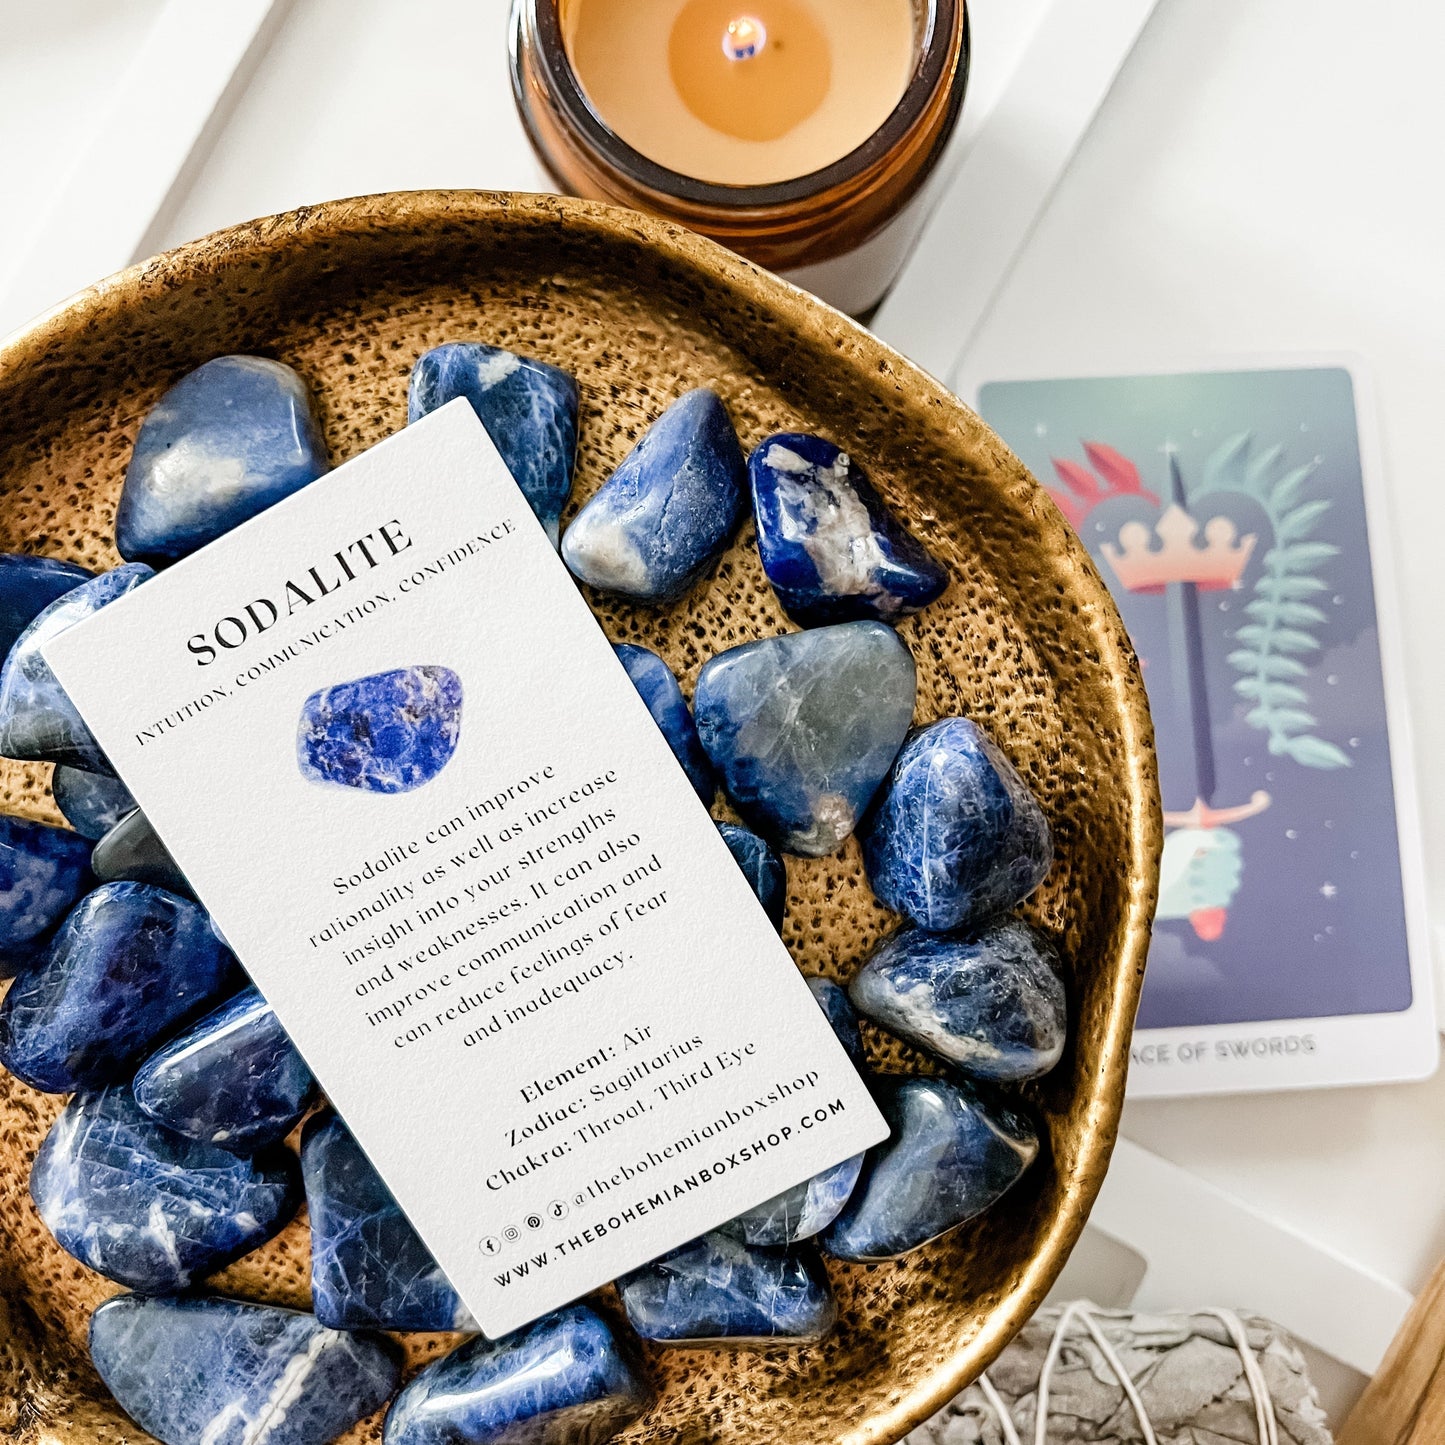 Sodalite Tumbled Stone with complementary keepsake information card